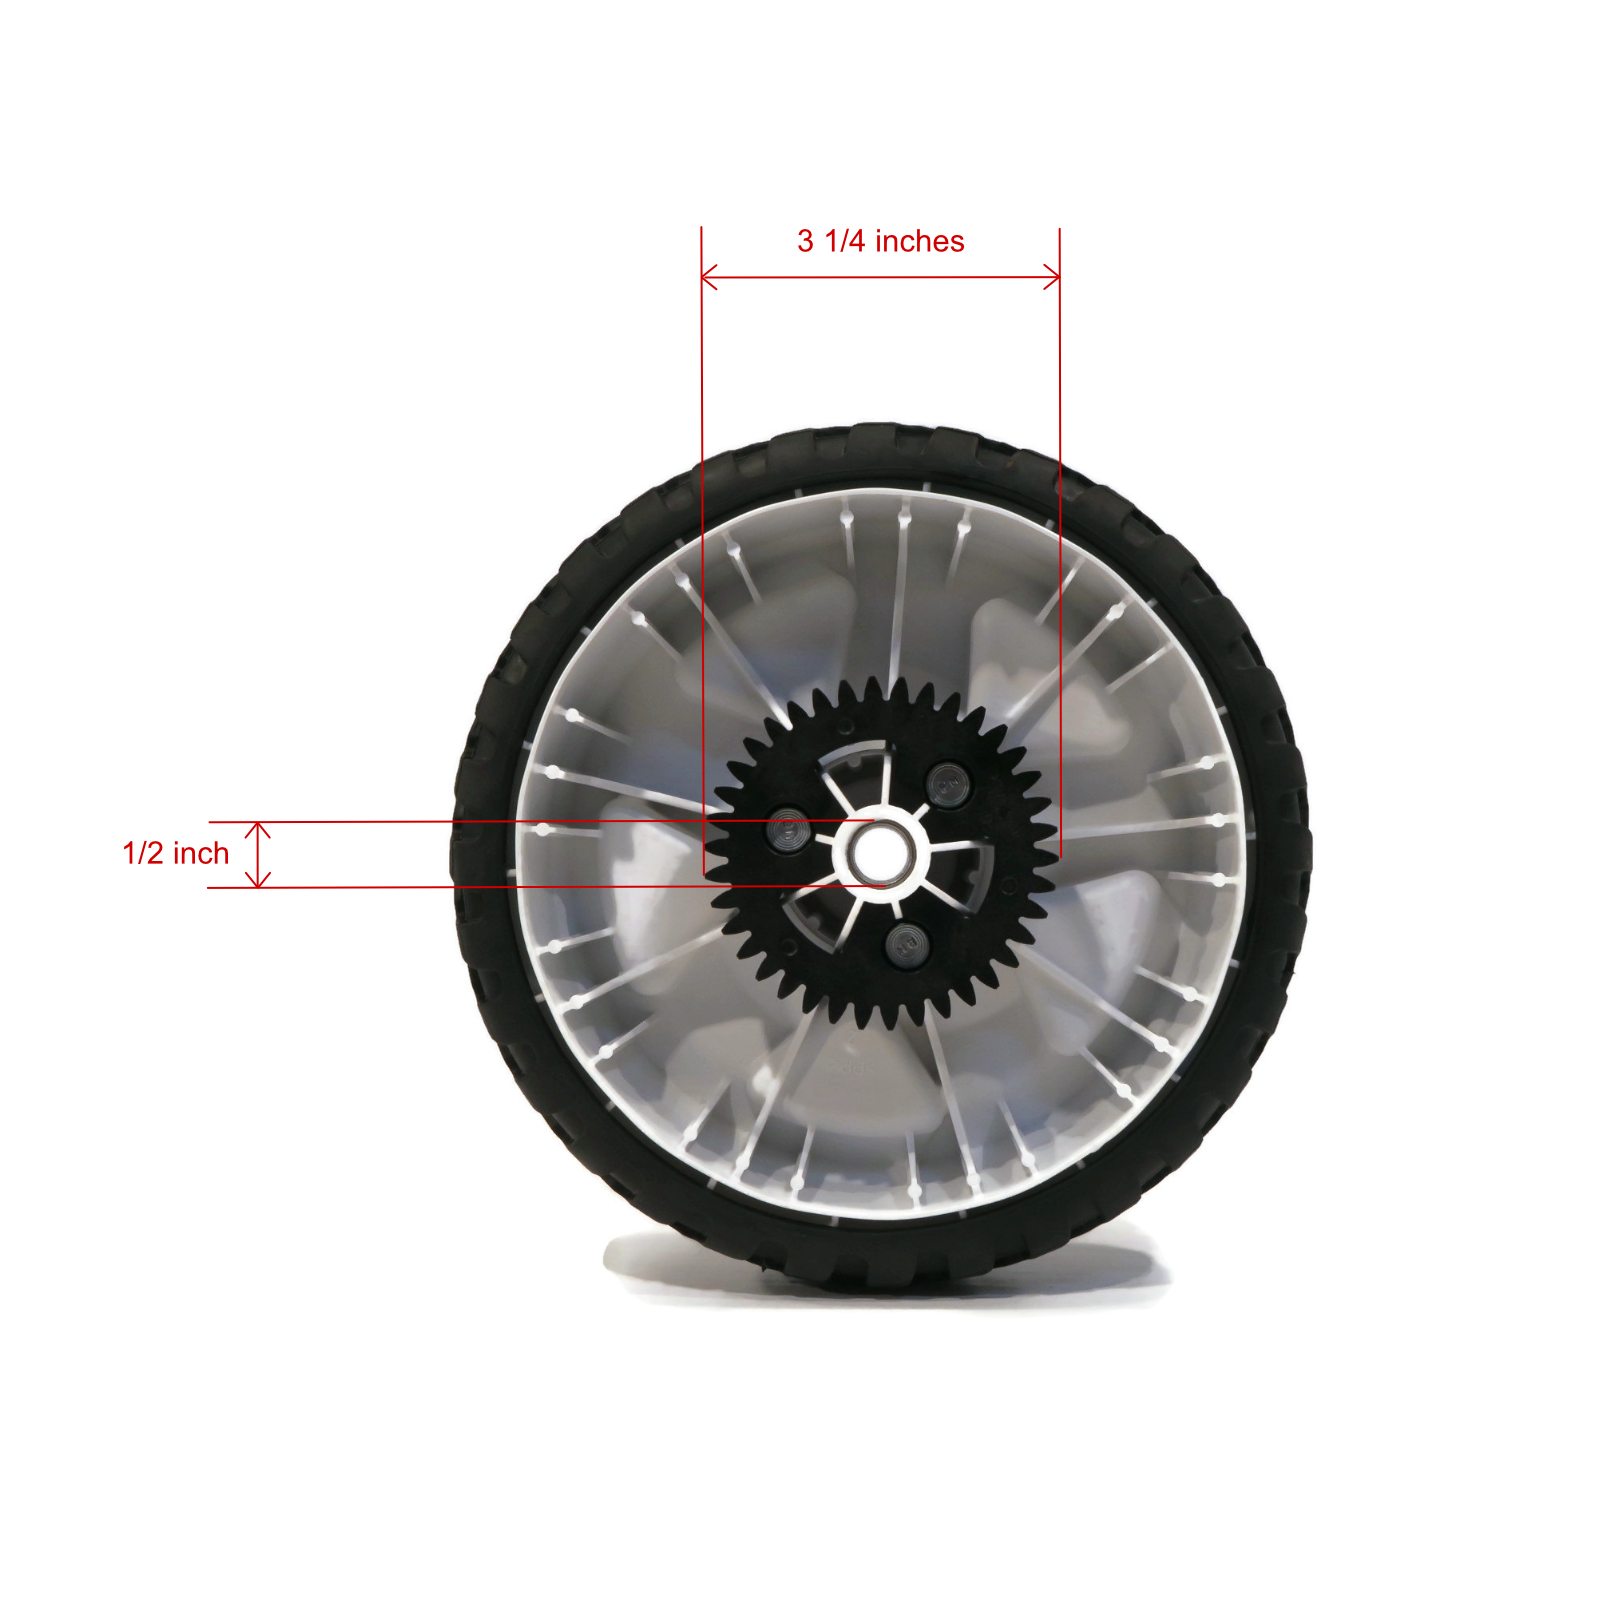 The ROP Shop | TORO OEM 8" Wheel Gear Assembly 138-3216 For RWD Push LawnMower Lawn Mower - image 3 of 7